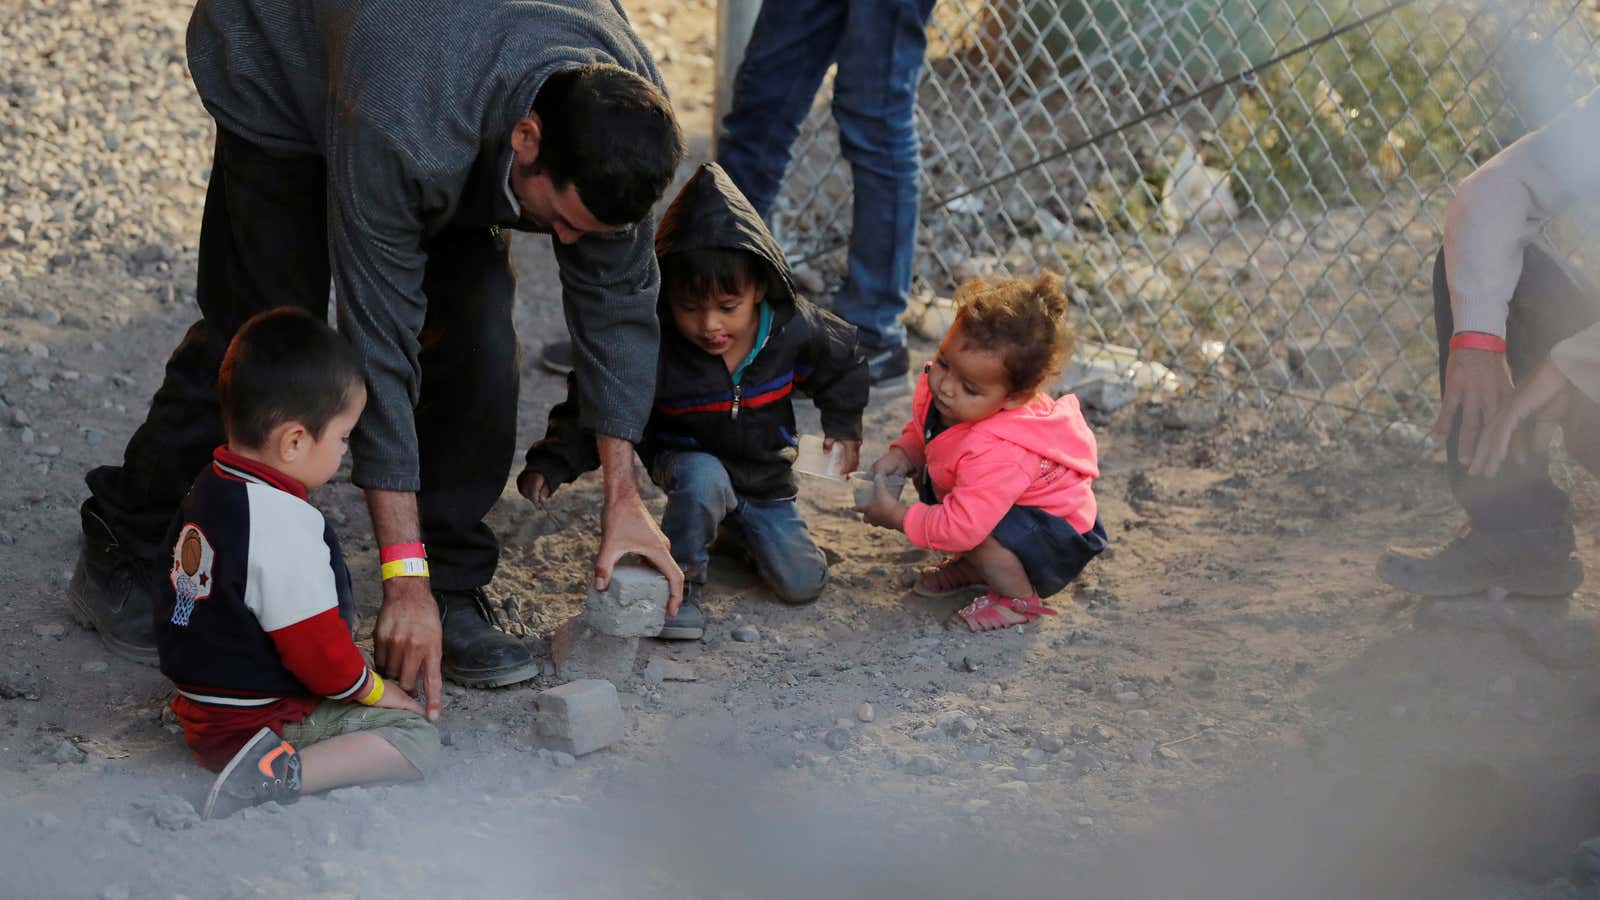 A man gives children rocks to play with inside an enclosure, where they were being held by U.S. Customs and Border Protection in El Paso, Texas.